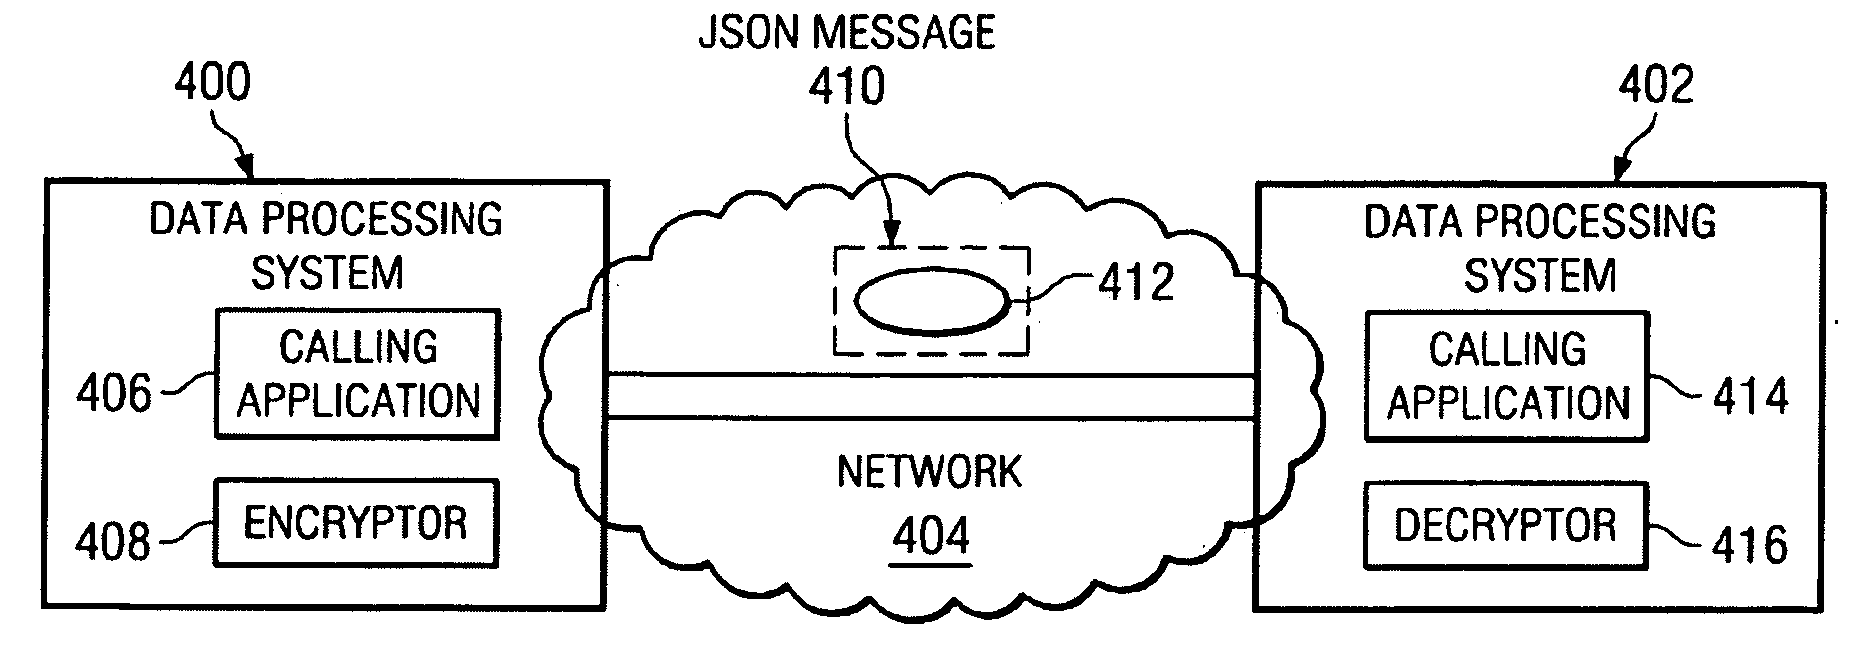 Method and System for Encrypting JavaScript Object Notation (JSON) Messages